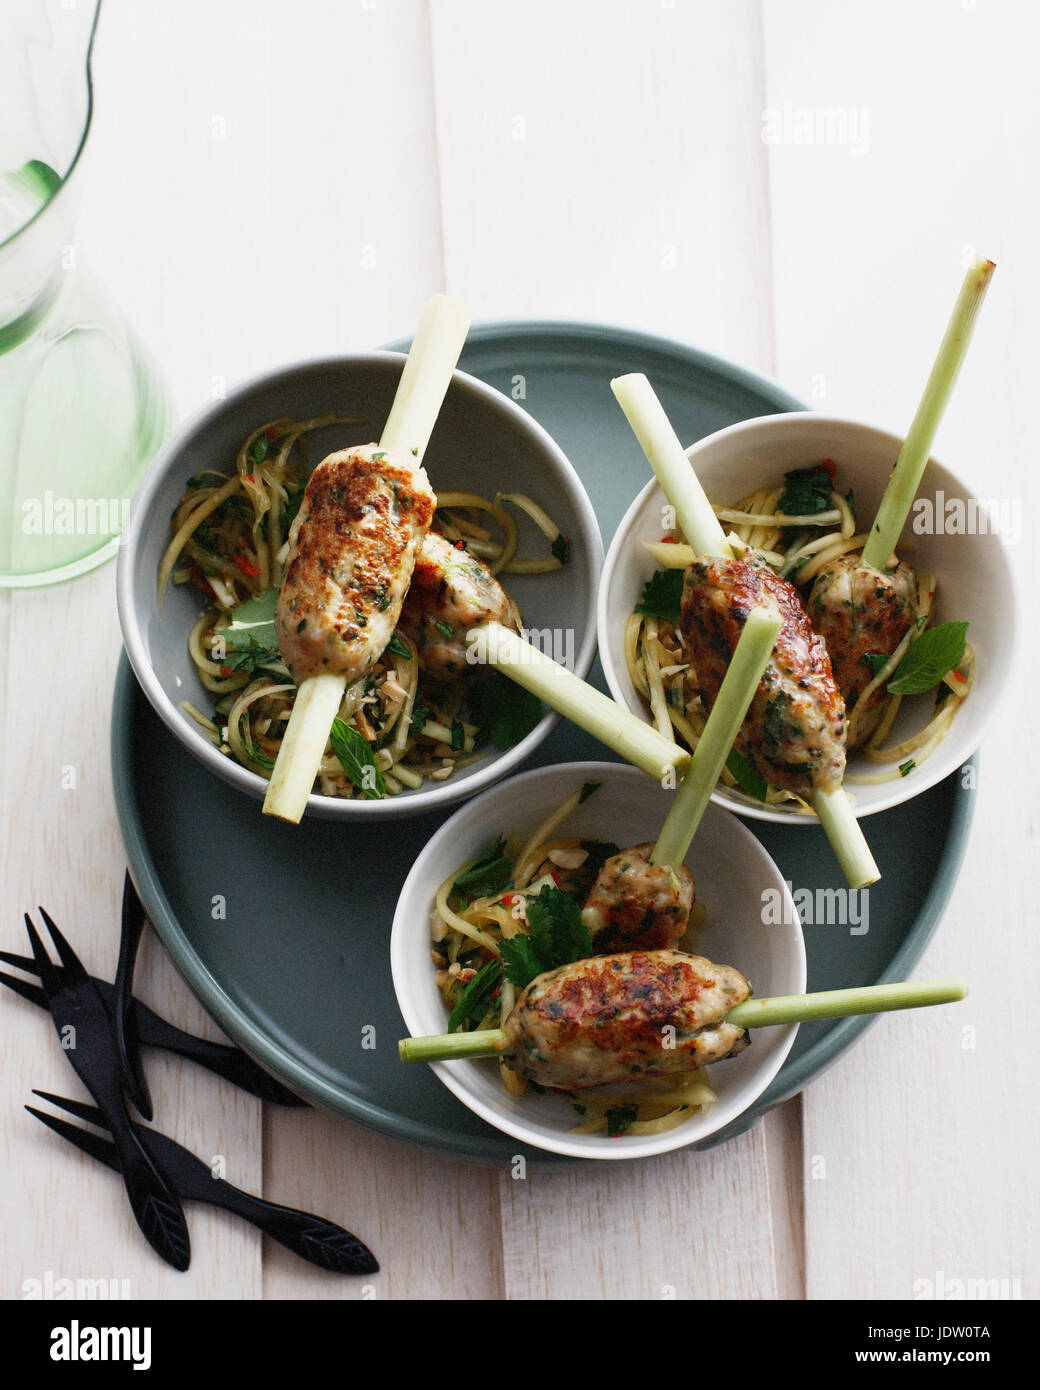 Skewers of pork with salad Stock Photo